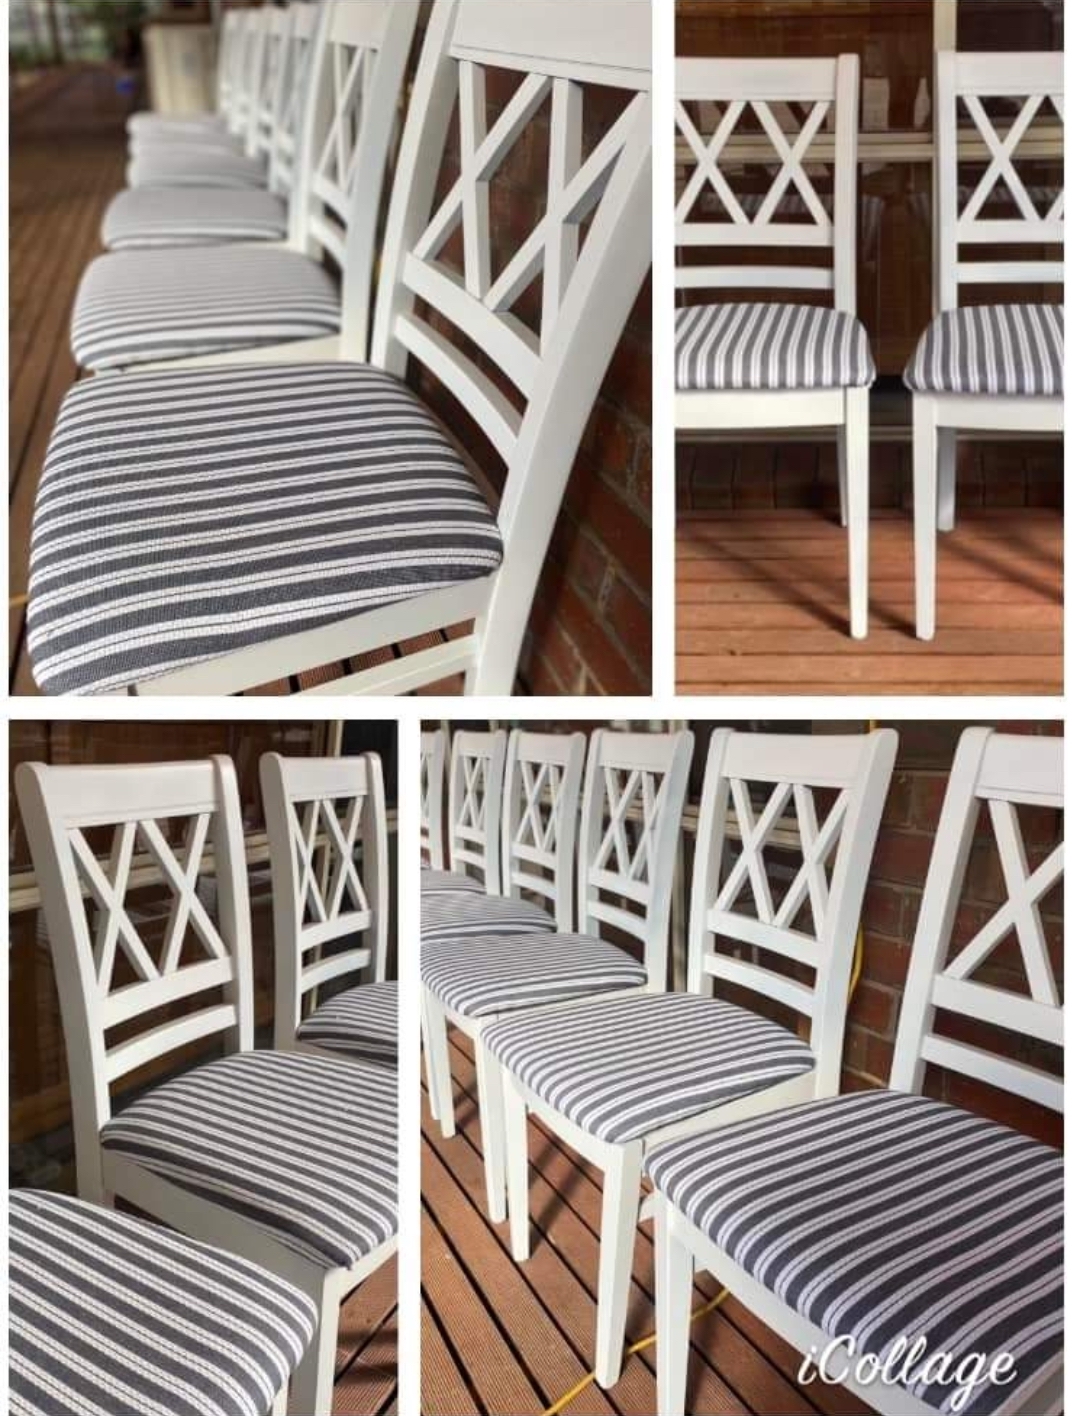 Hamptons style dining chairs